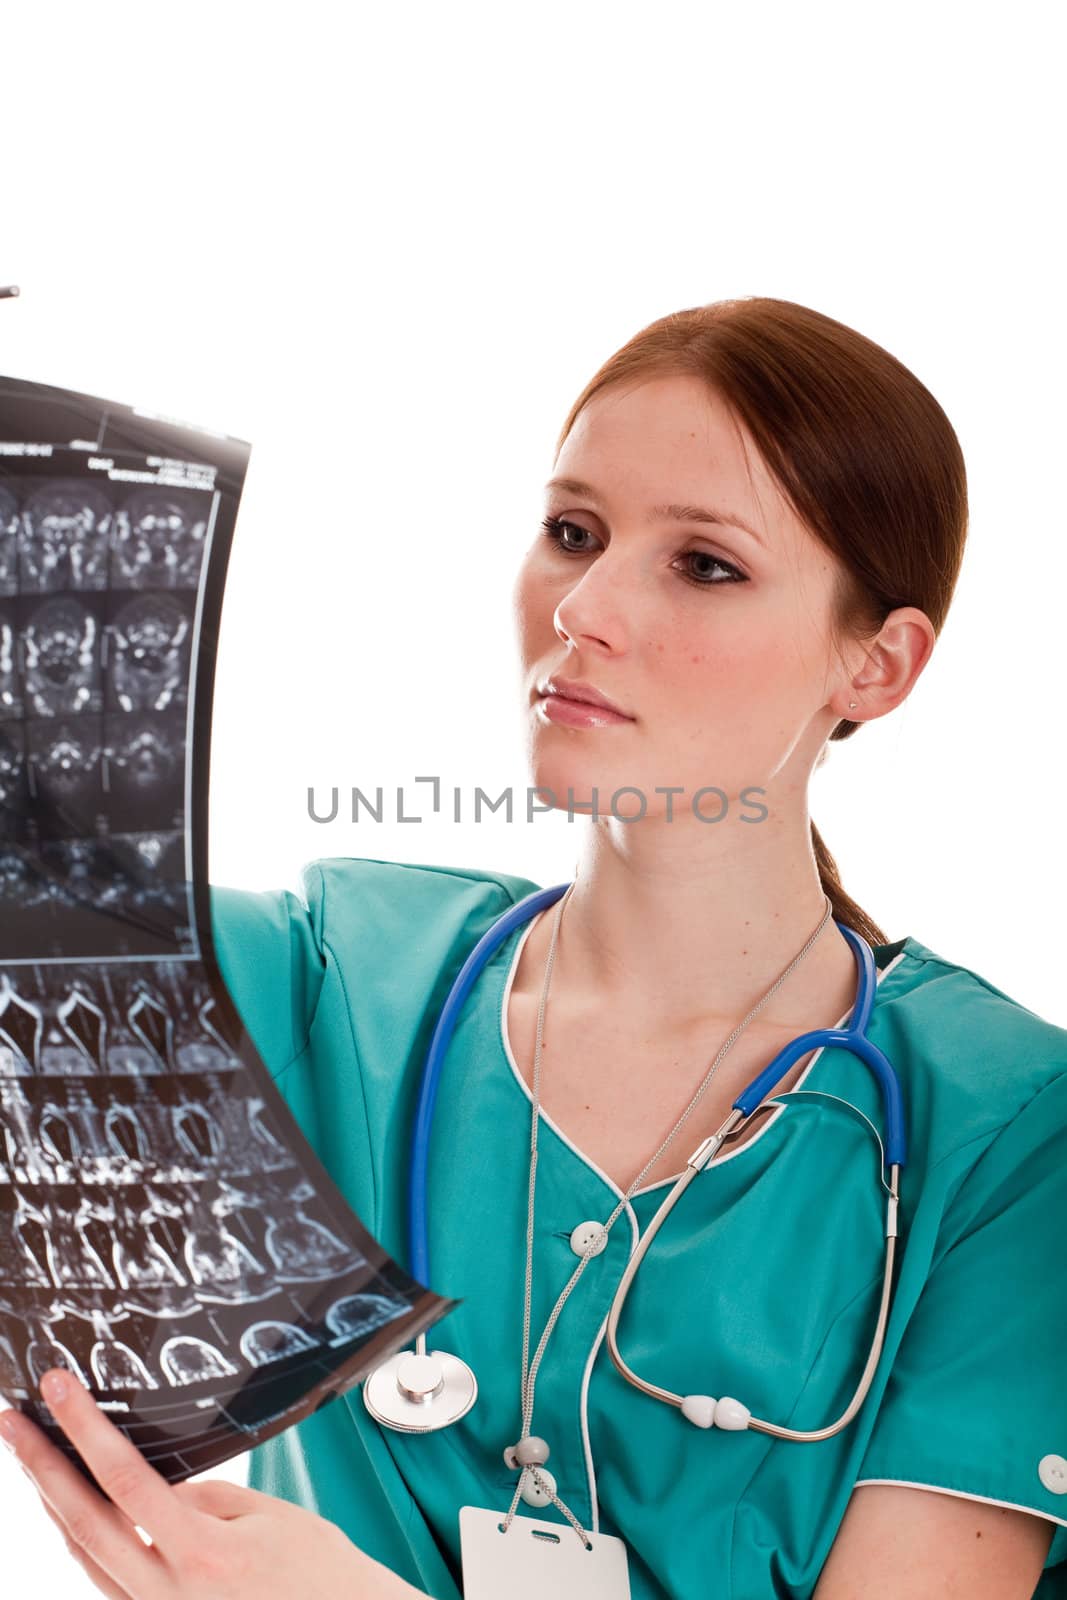 Female doctor looking at xray picture